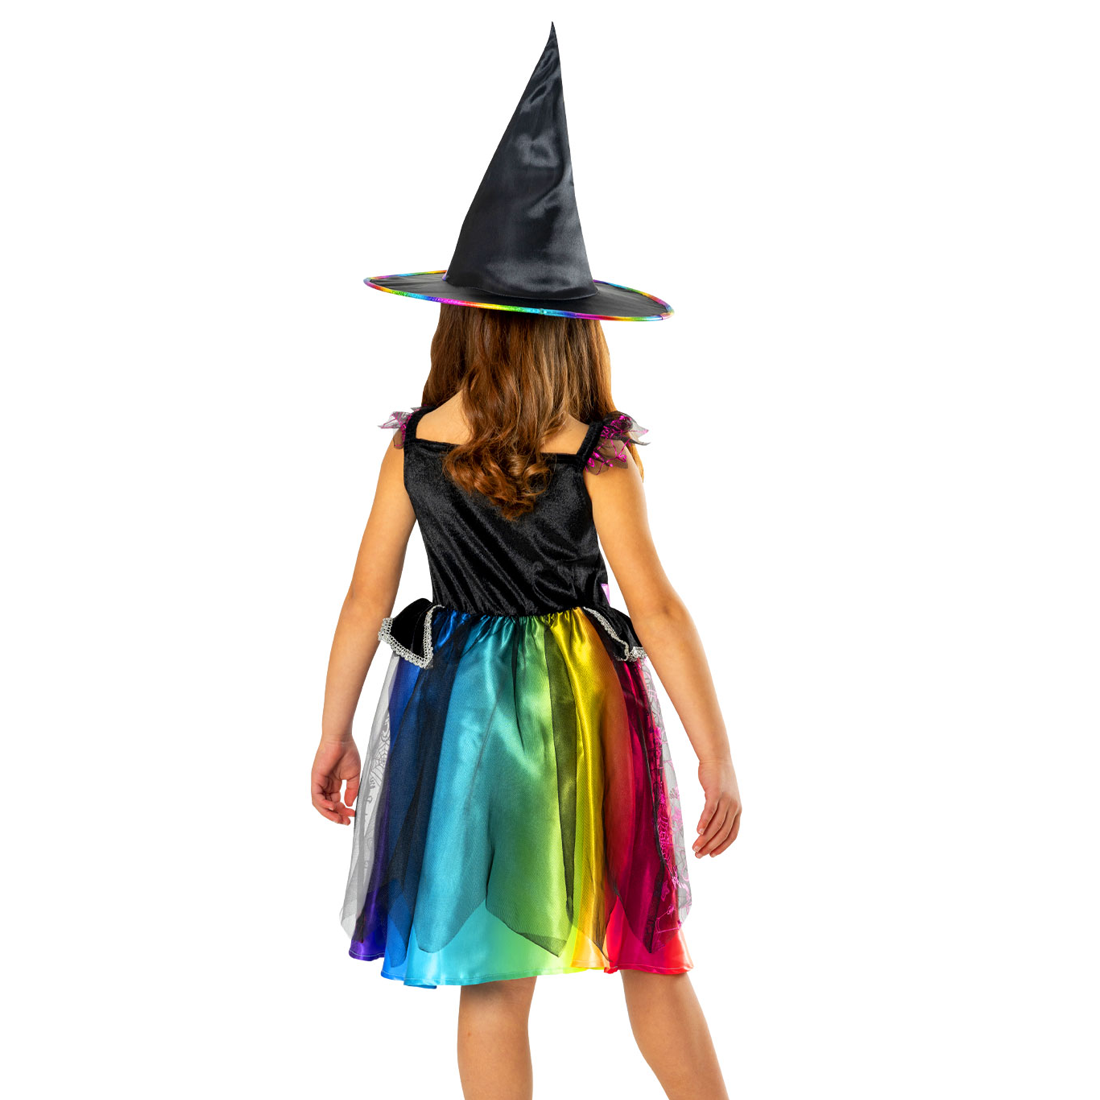 Barbie Witch Childs Costume